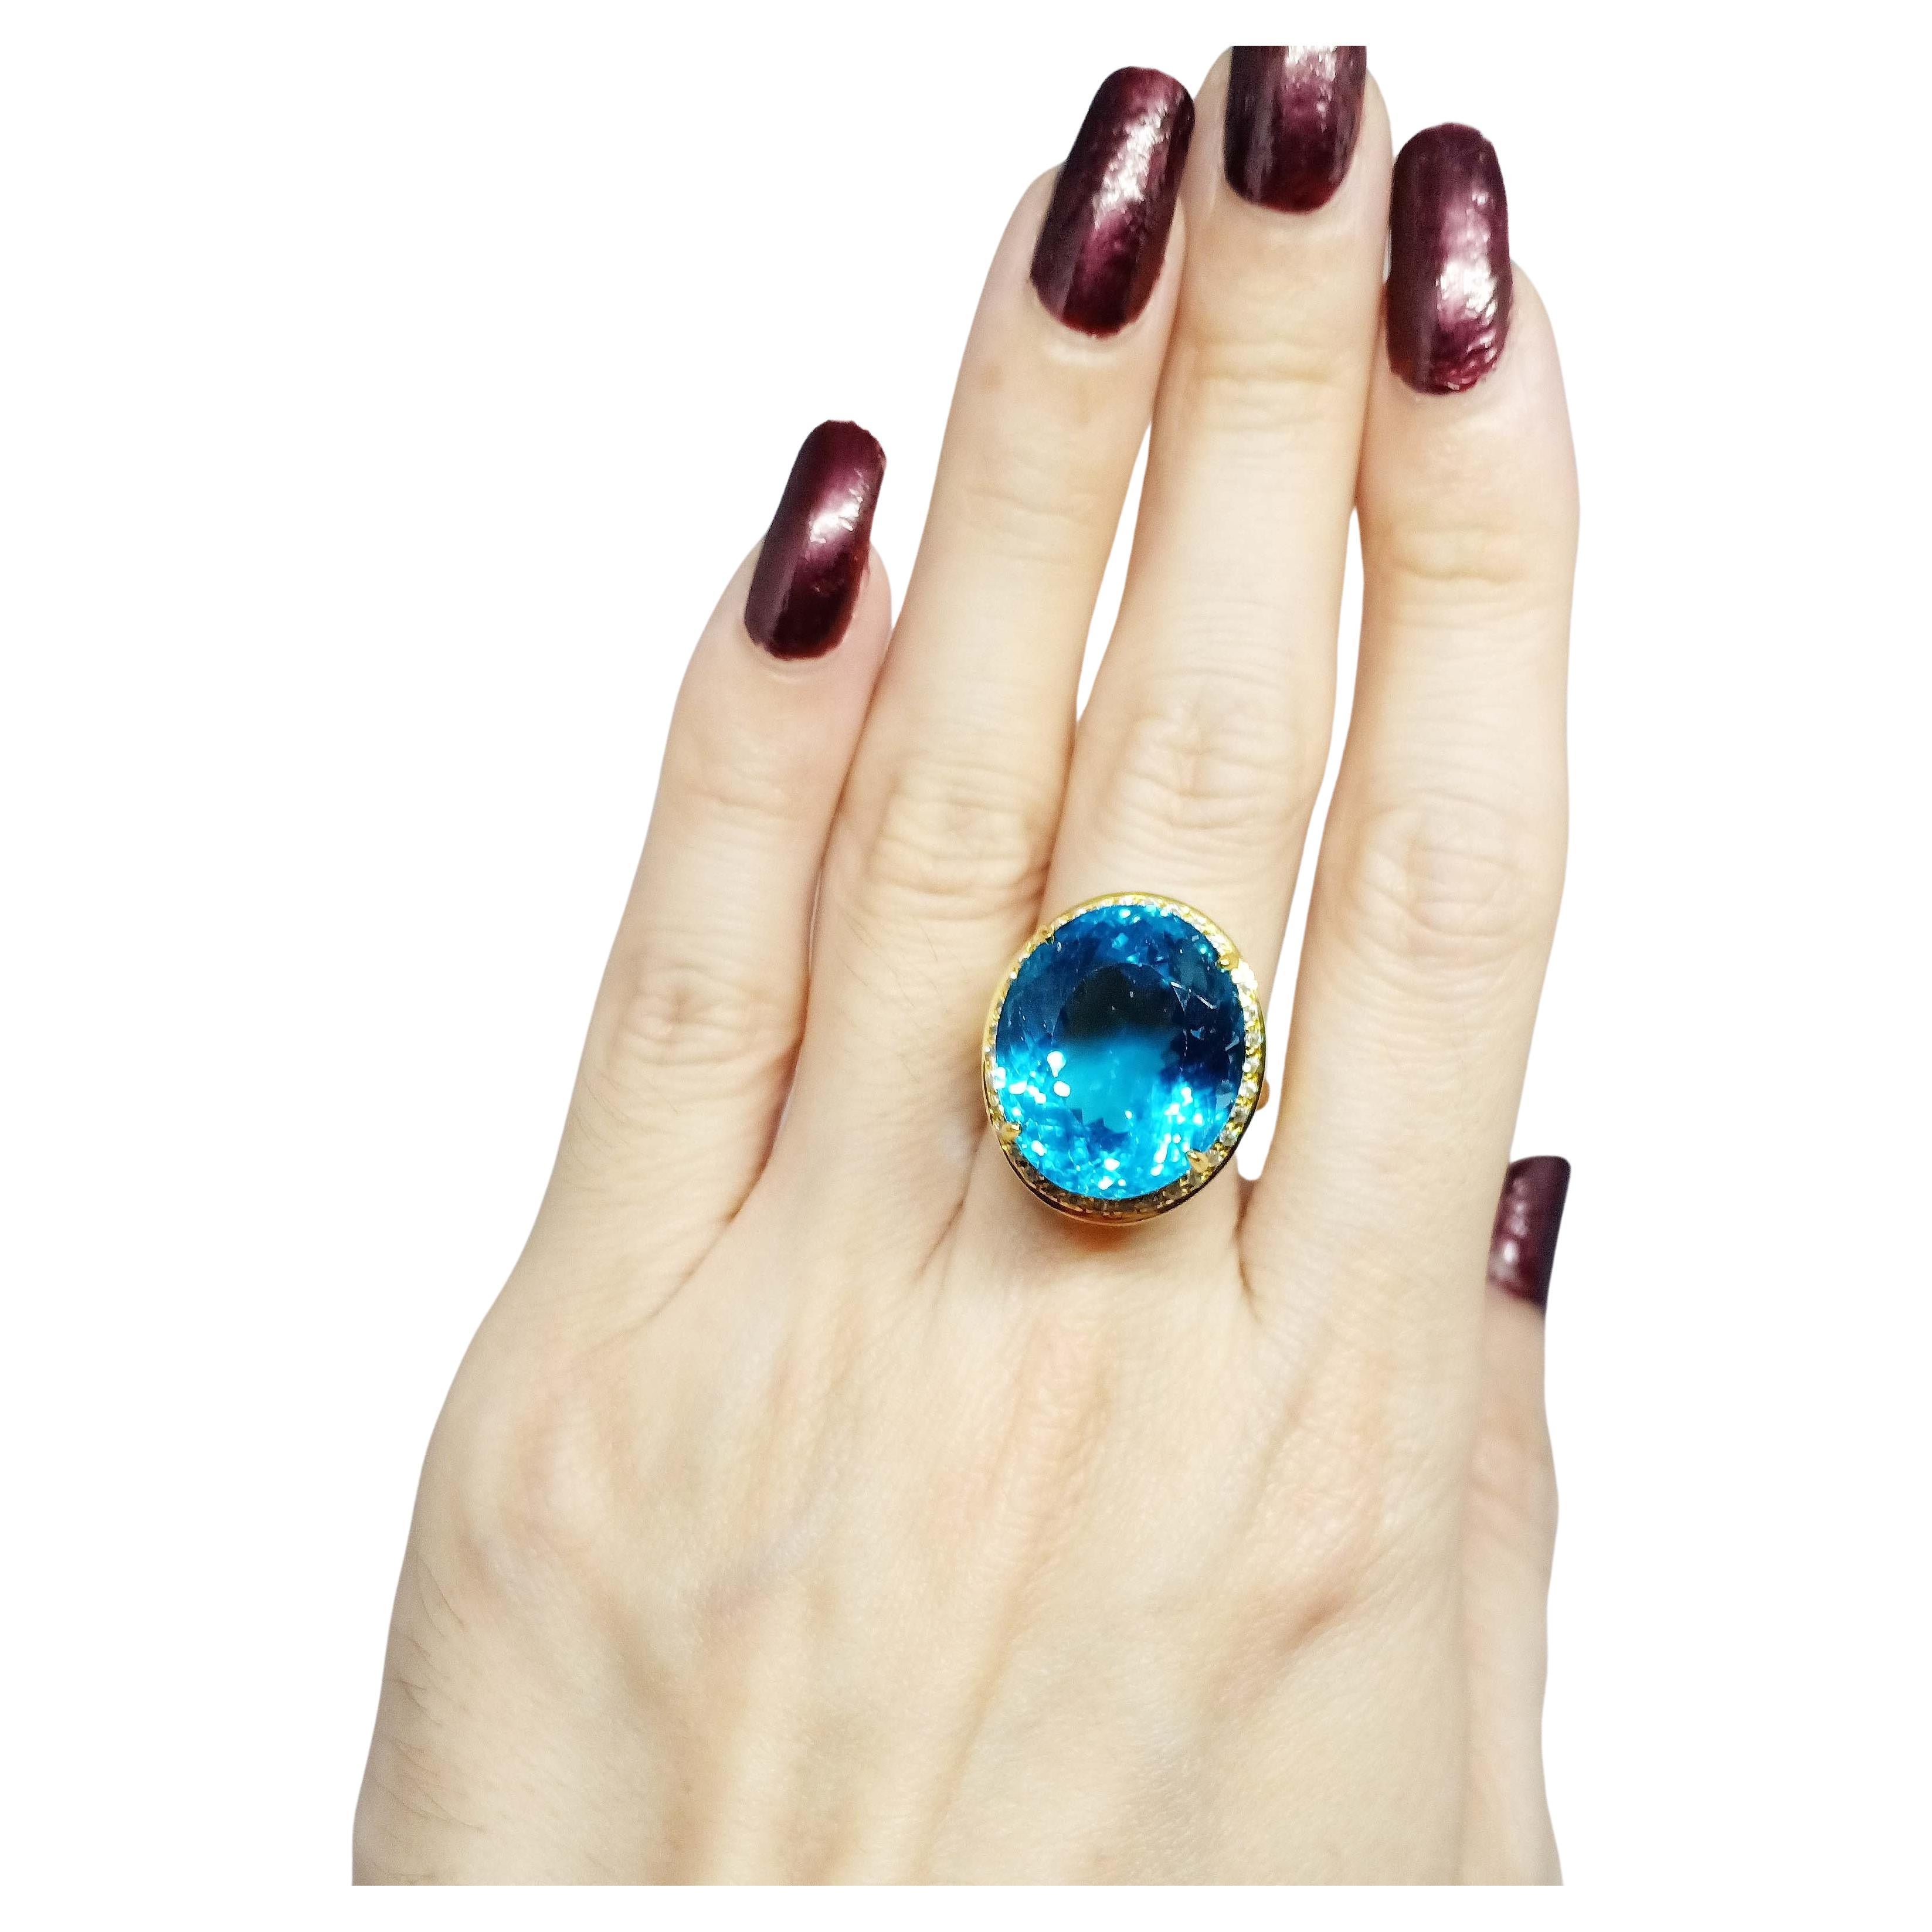 25.19 cts Swiss BlueTopaz Sterling Silver In 18K Gold Plated For Sale